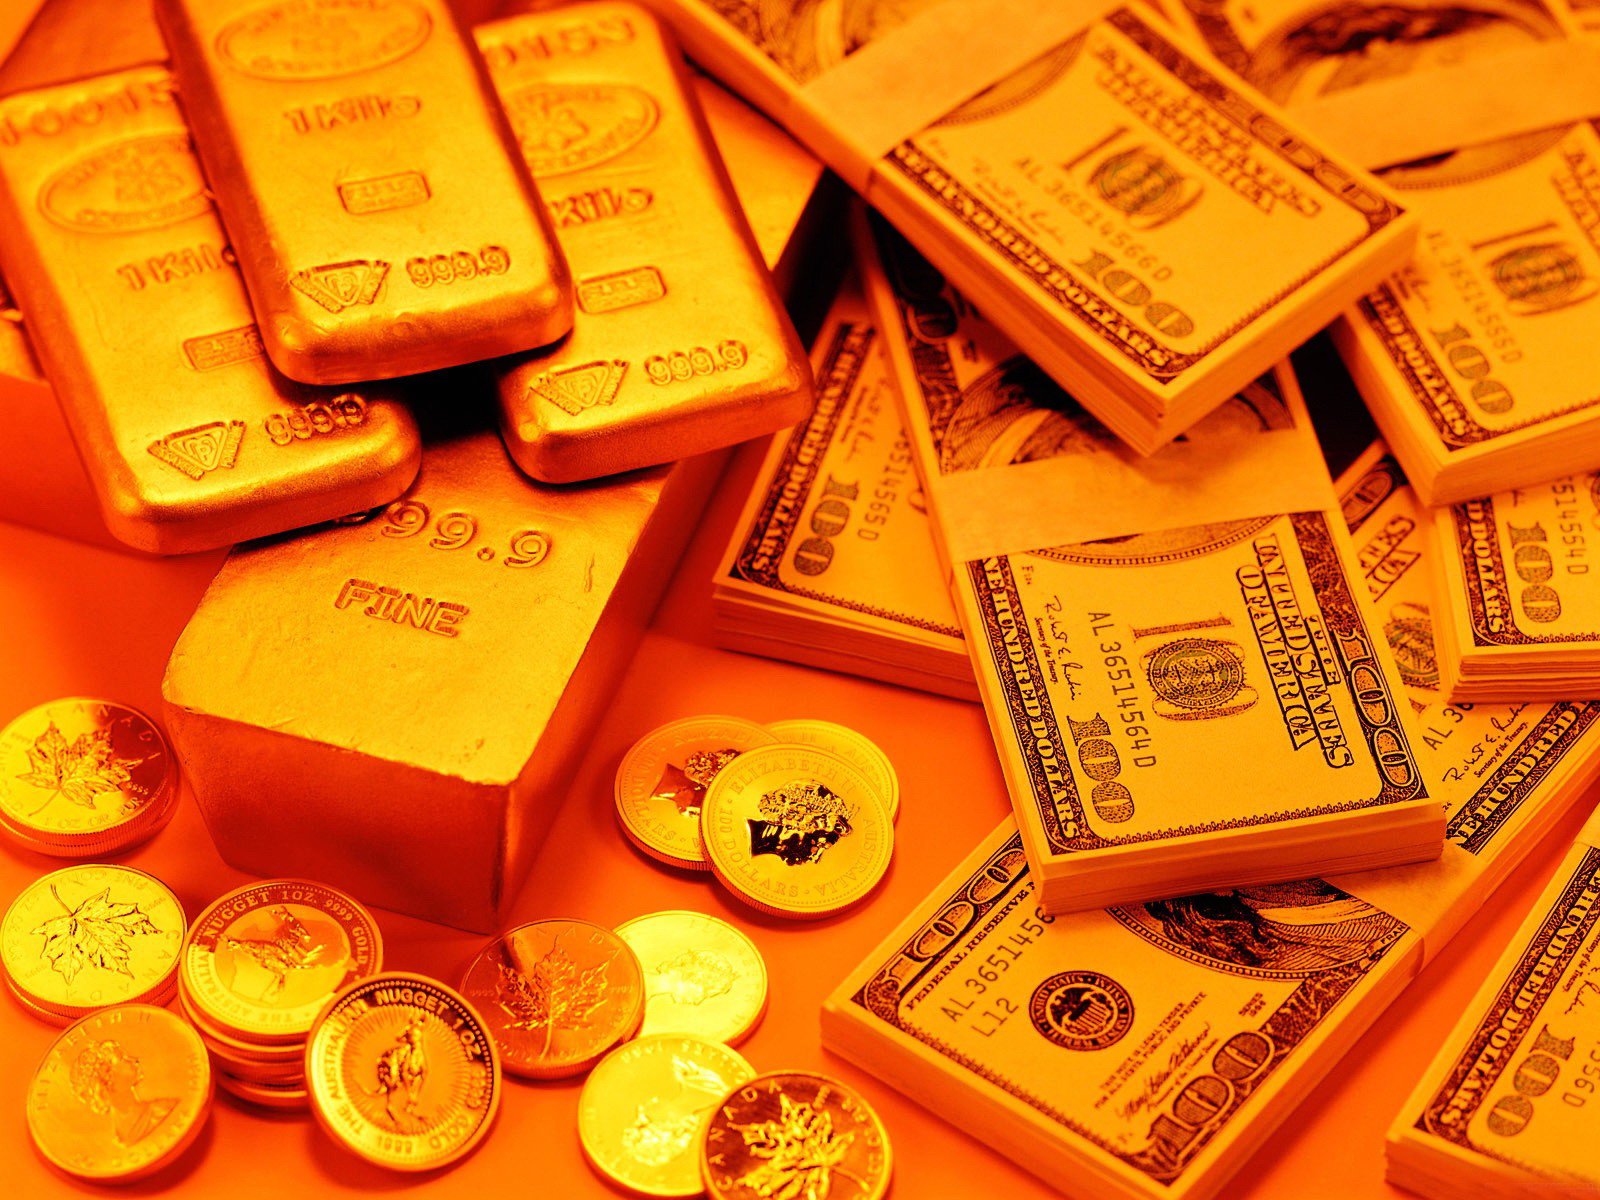       21-4-2014 , The price of gold in Egypt